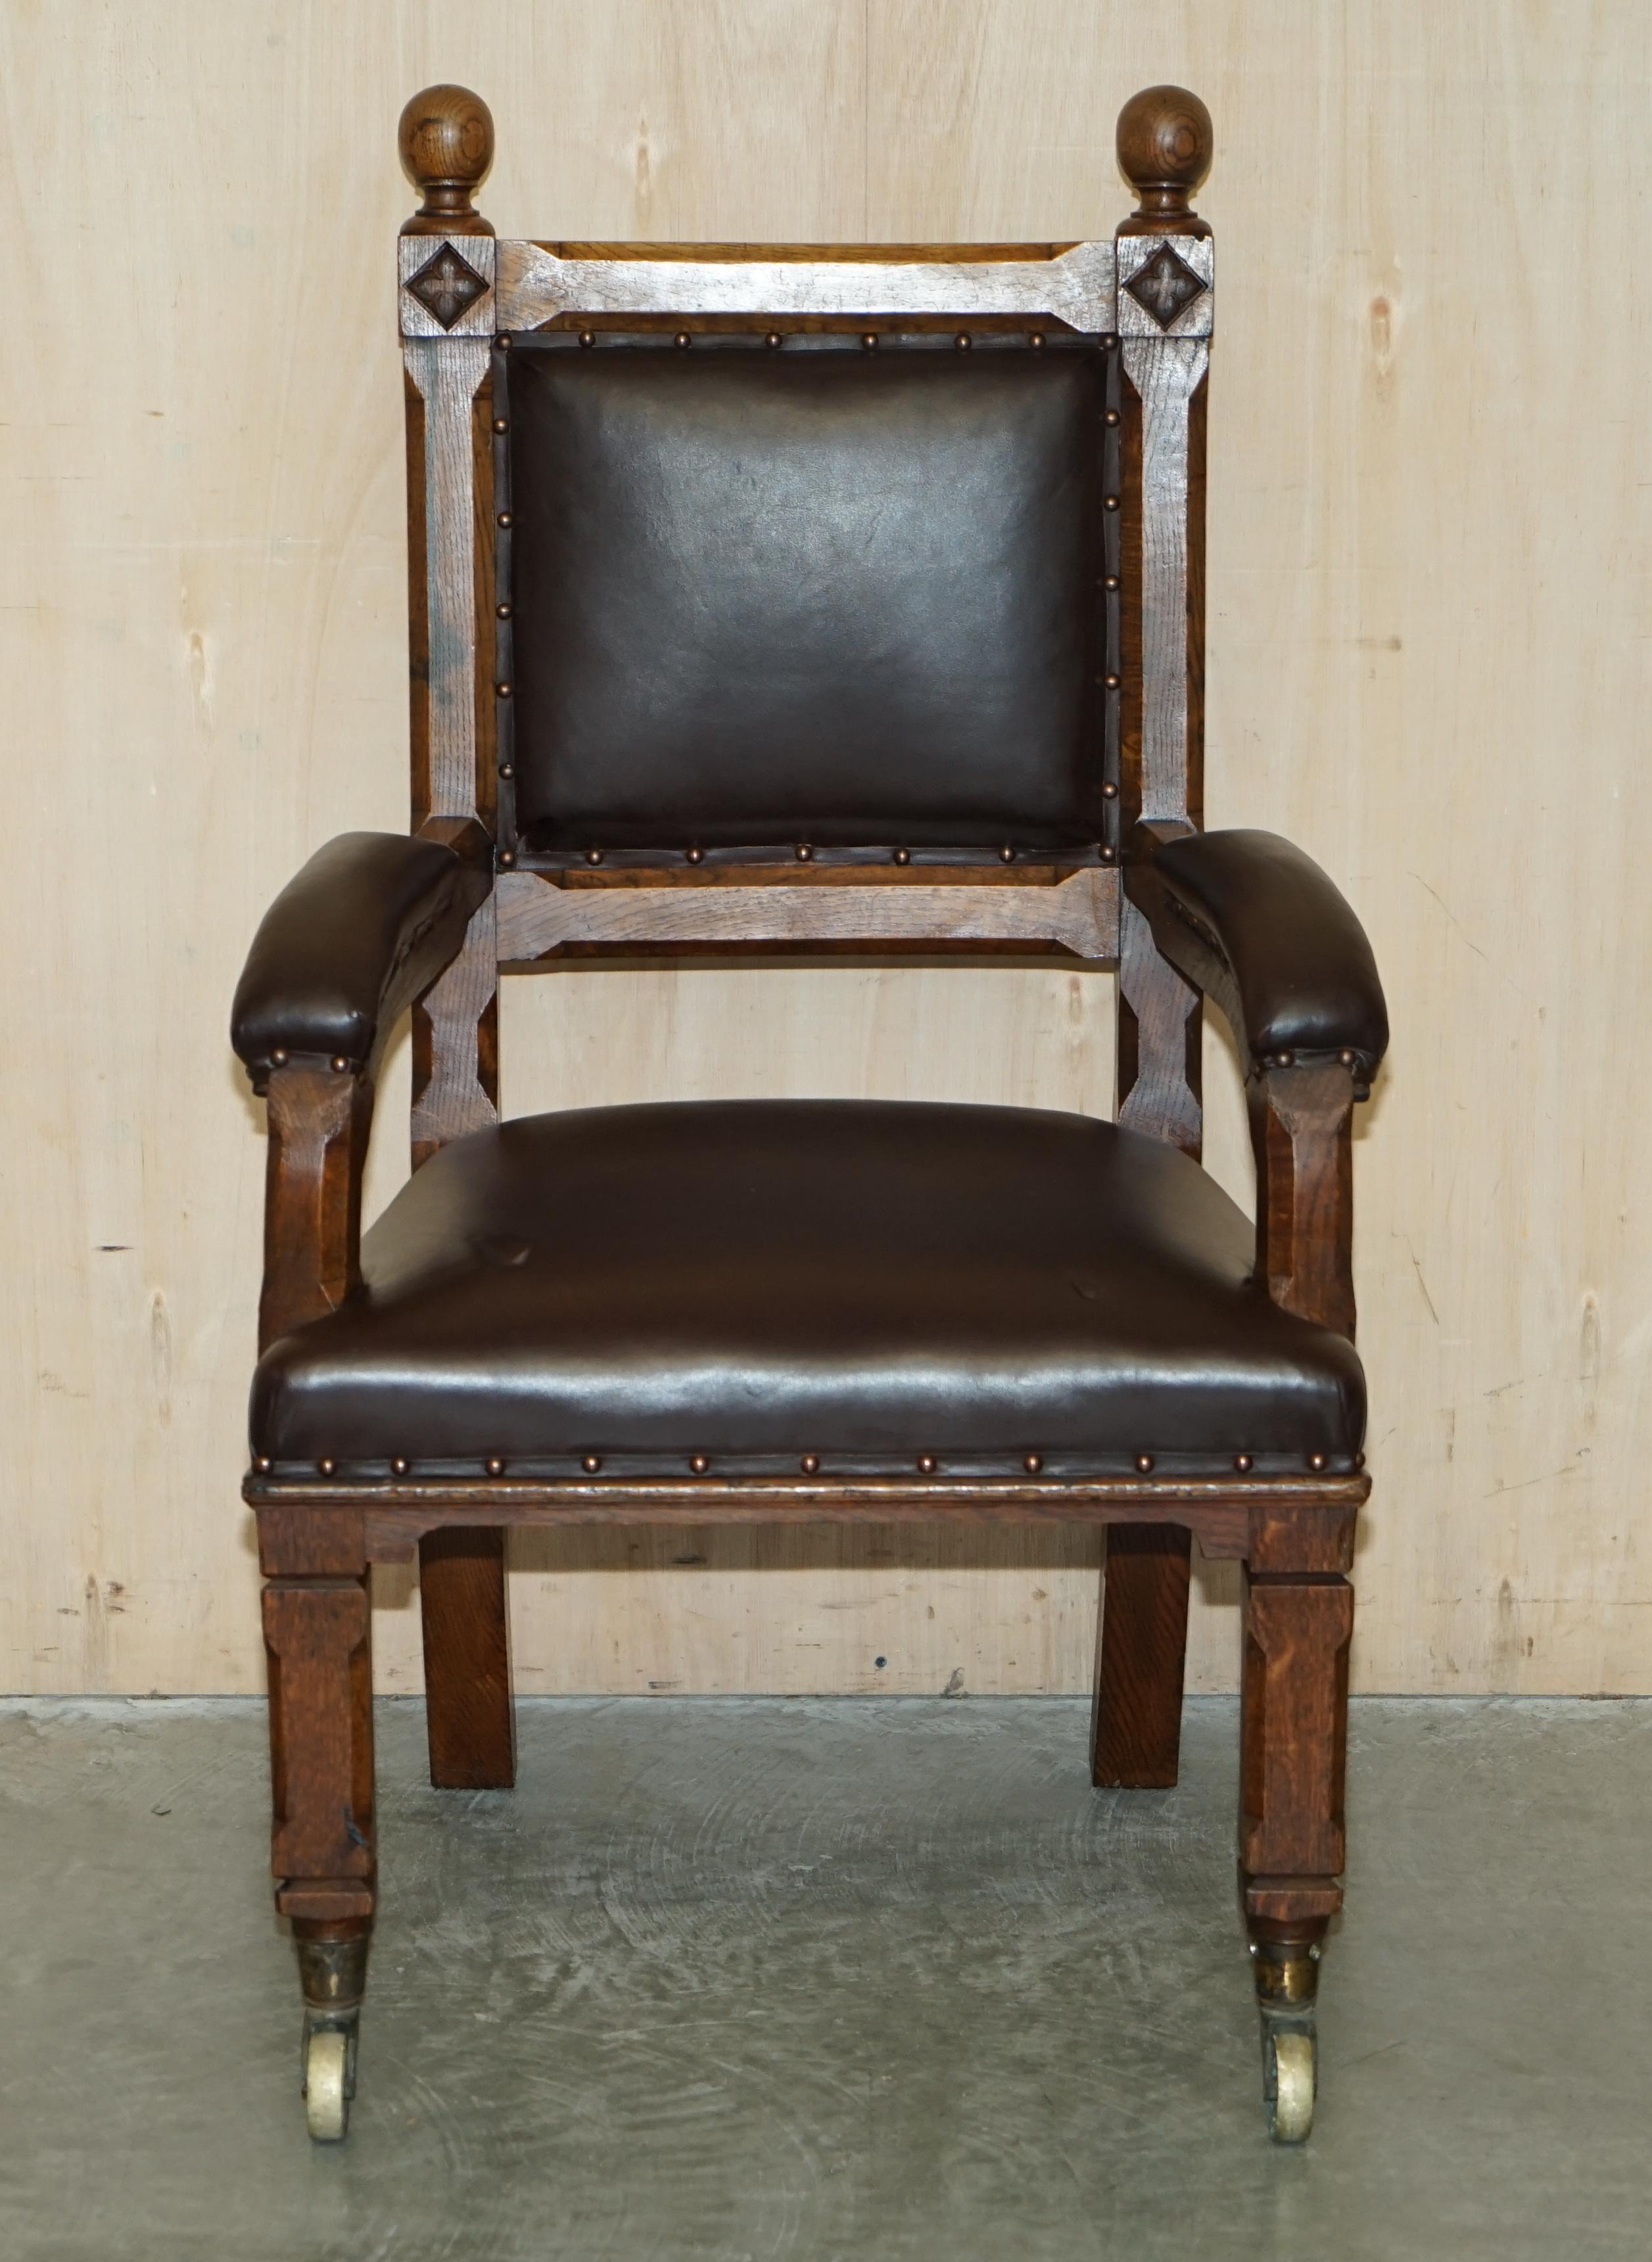 Royal House Antiques

Royal House Antiques is delighted to offer for sale this stunning antique circa 1880 hand carved English oak carver armchair with period castors and upholstery 

Please note the delivery fee listed is just a guide, it covers